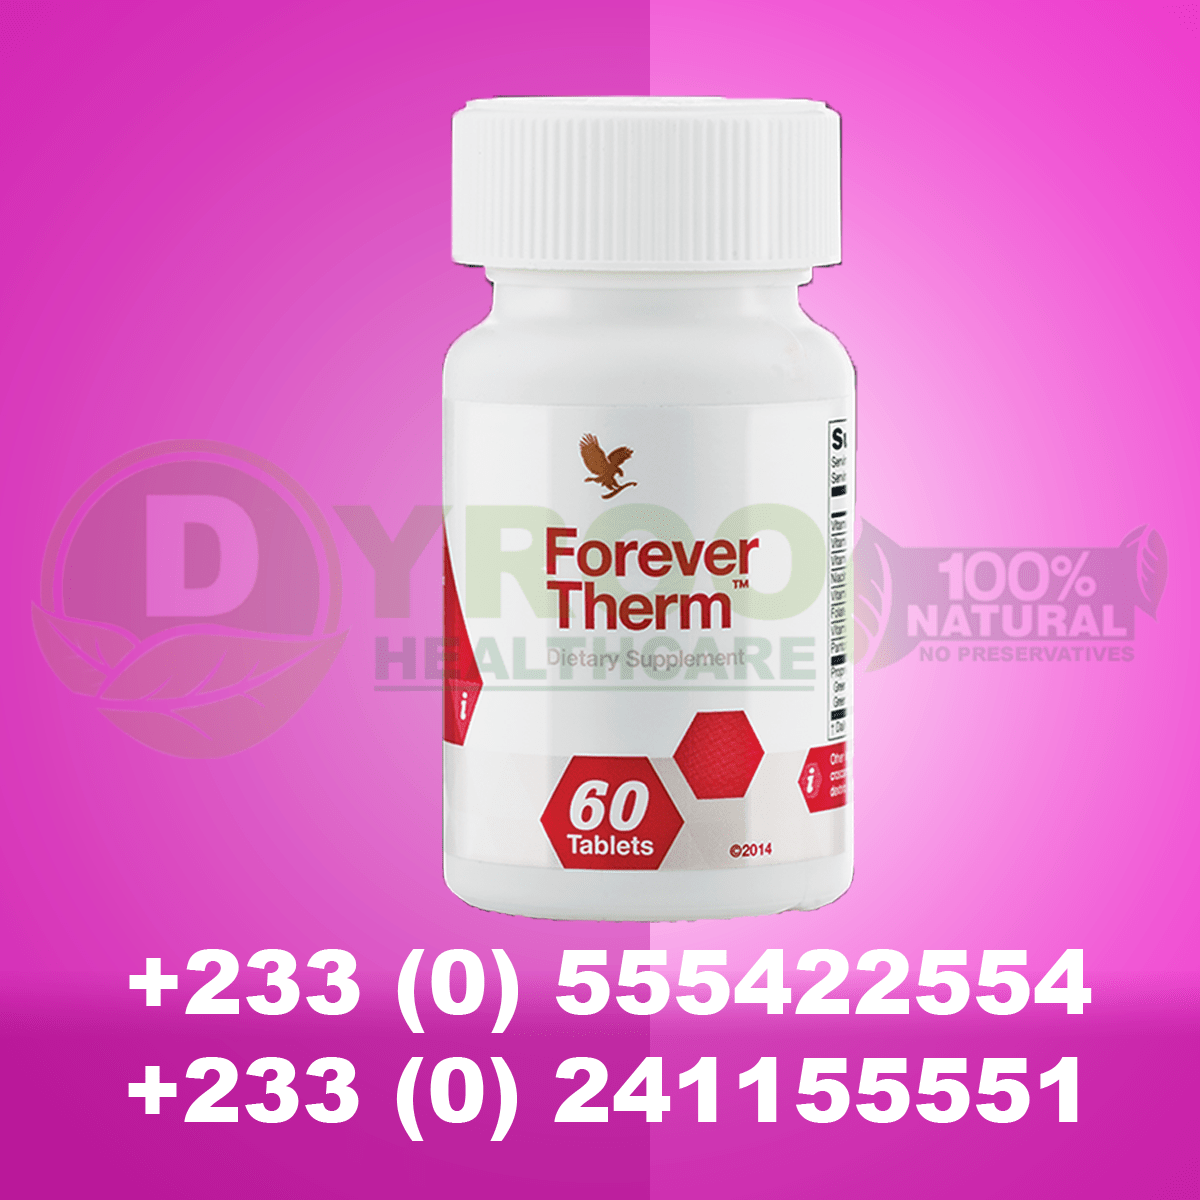 Forever Therm Price in Ghana